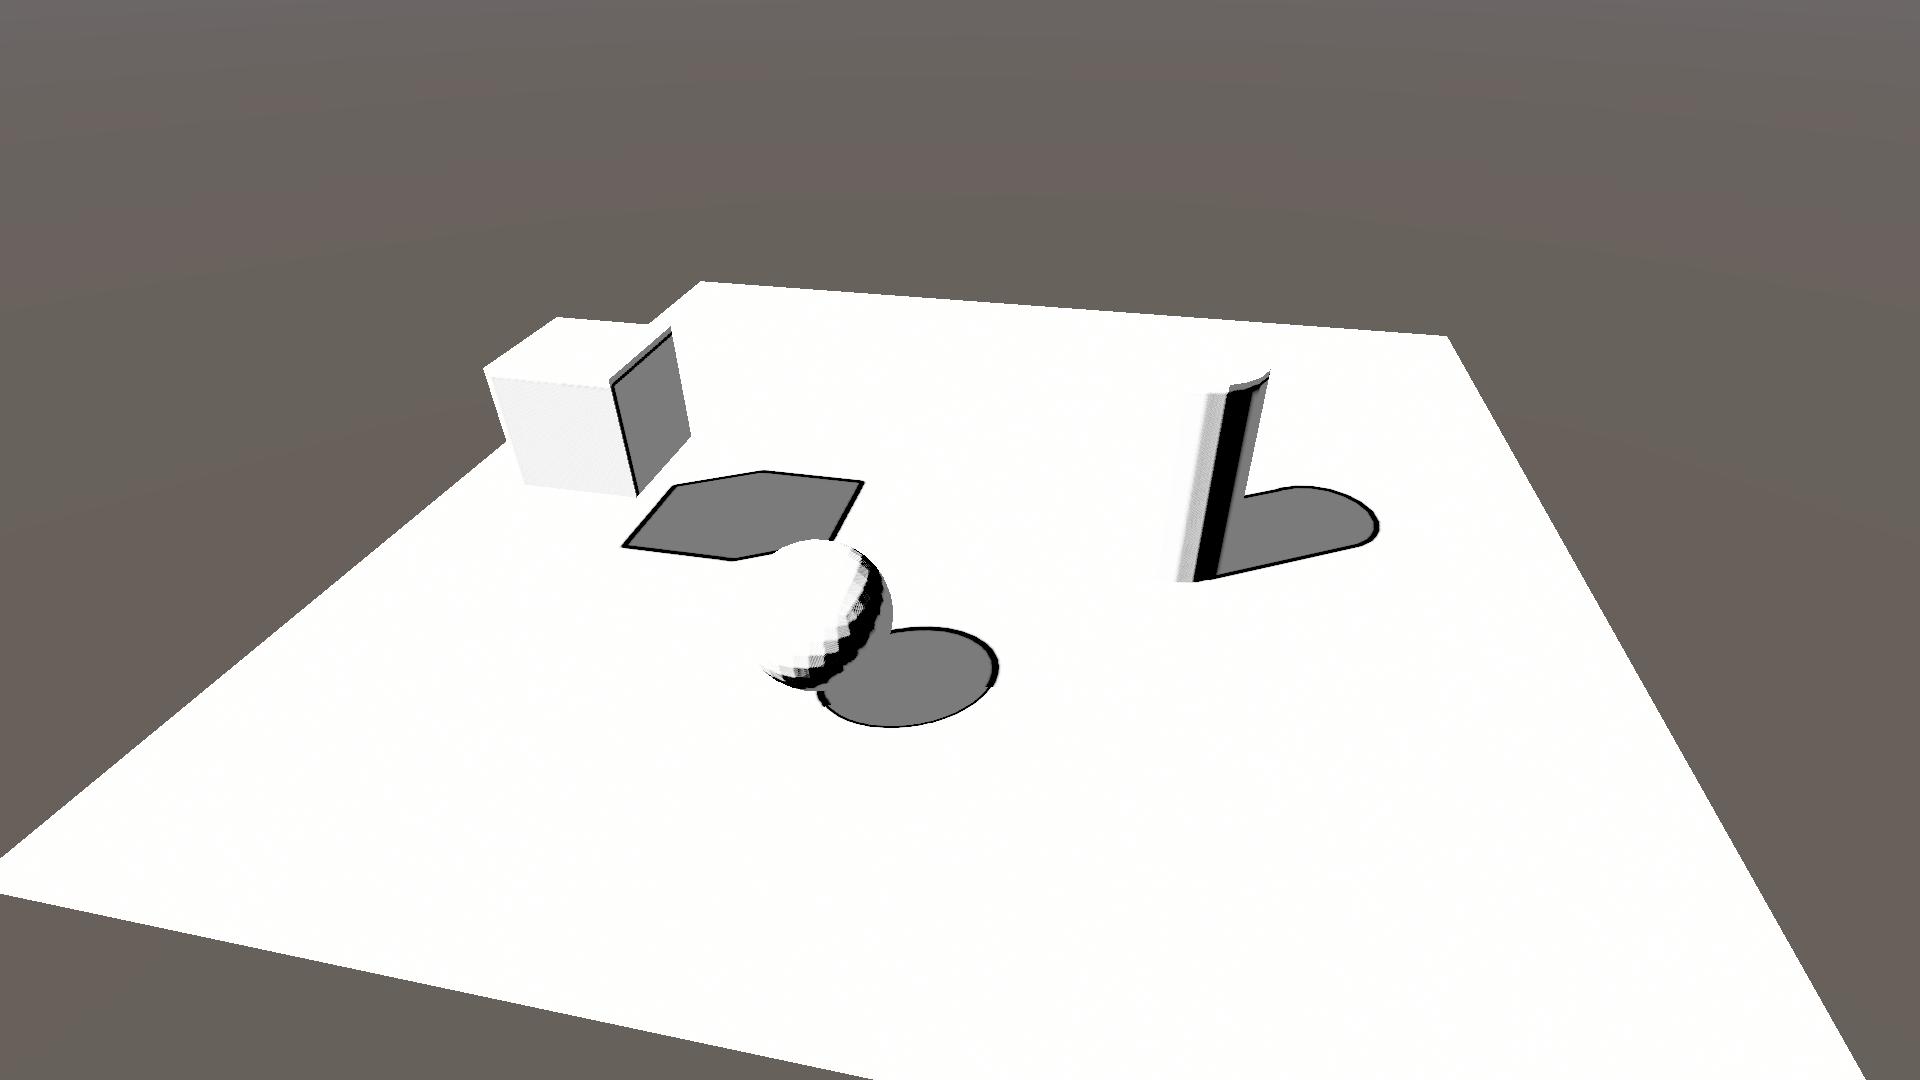 First implementation of the shadow outlines.